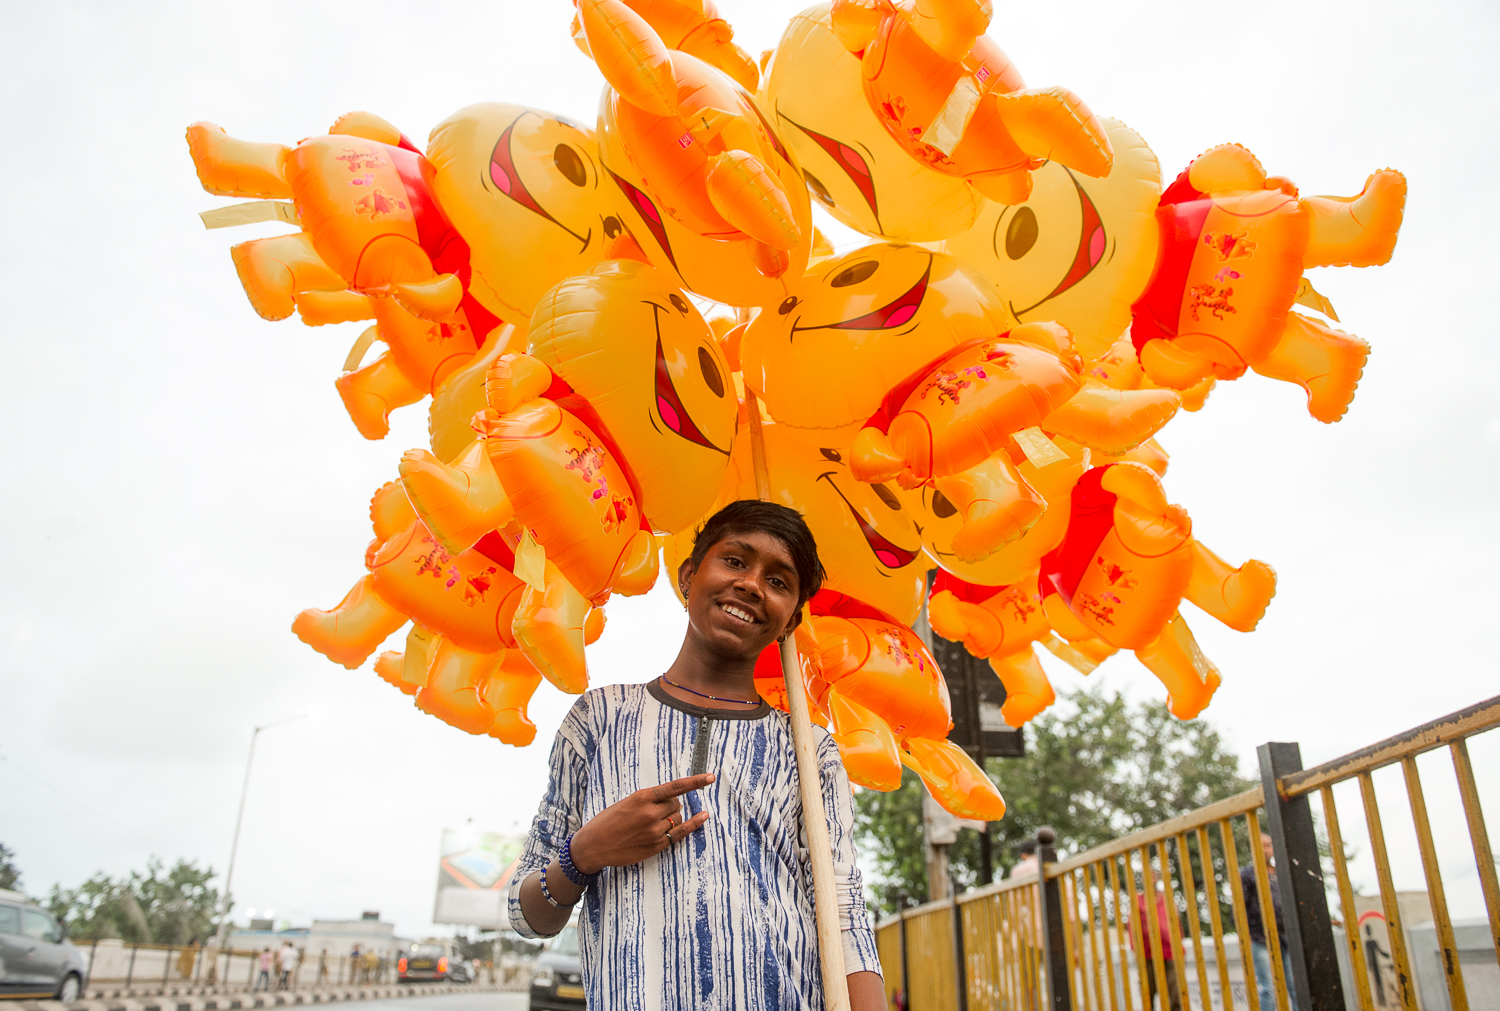  Boy selling balloons during Indias day of independence, 2017 